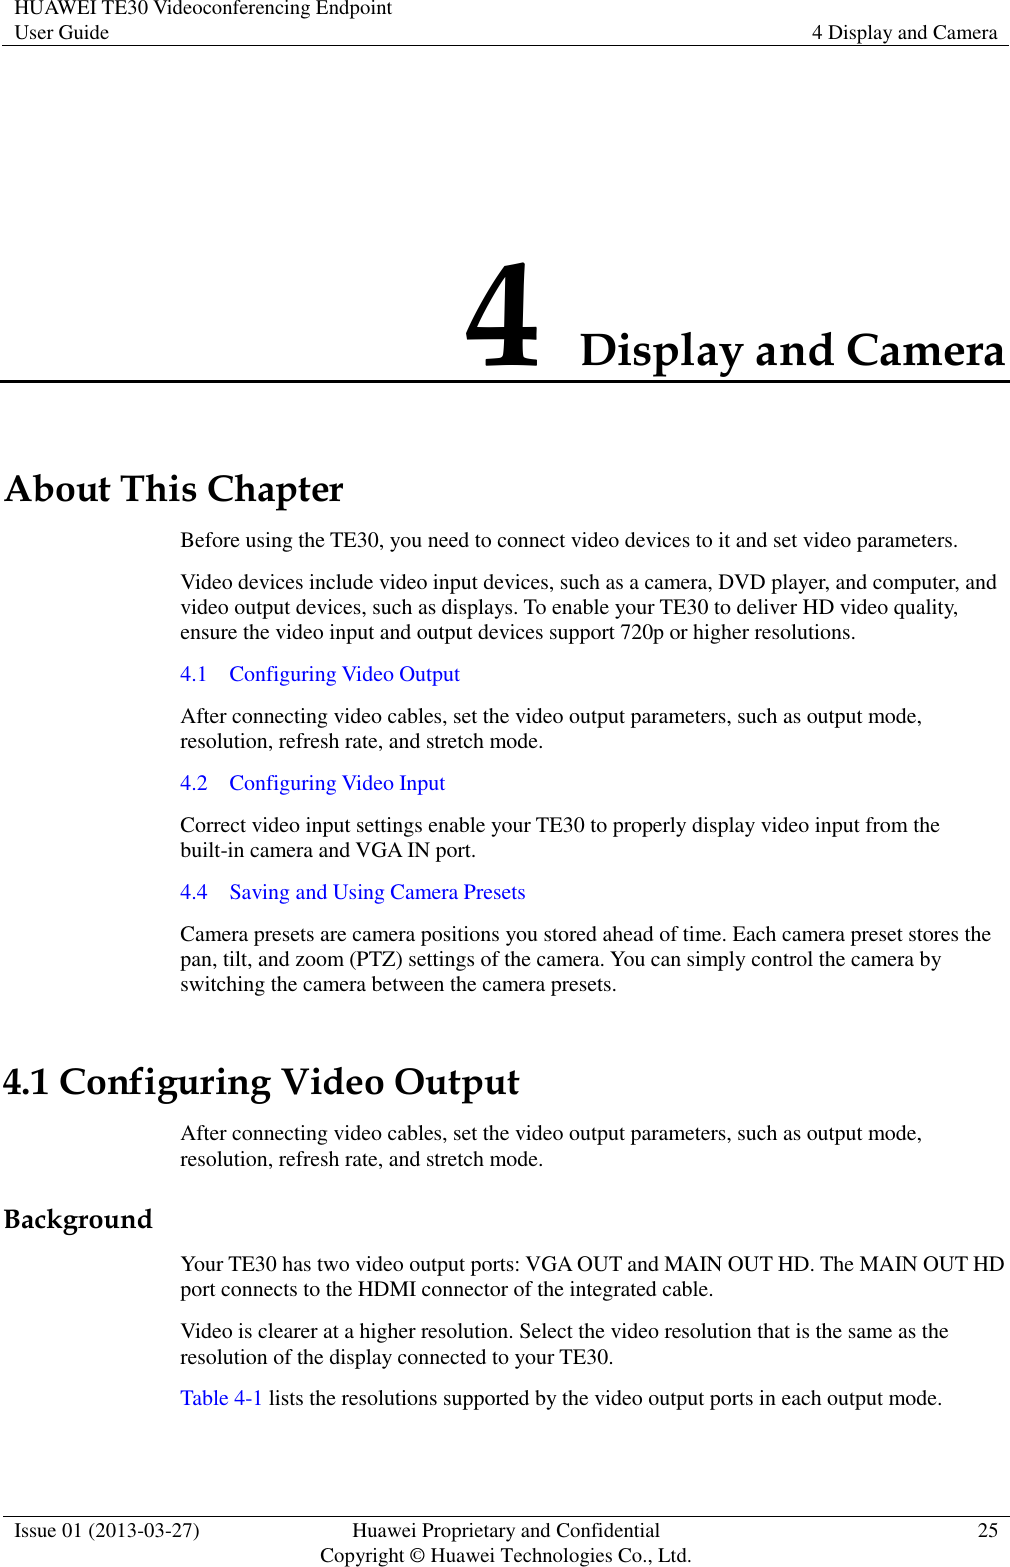 HUAWEI TE30 Videoconferencing Endpoint User Guide 4 Display and Camera  Issue 01 (2013-03-27) Huawei Proprietary and Confidential                                     Copyright © Huawei Technologies Co., Ltd. 25  4 Display and Camera About This Chapter Before using the TE30, you need to connect video devices to it and set video parameters. Video devices include video input devices, such as a camera, DVD player, and computer, and video output devices, such as displays. To enable your TE30 to deliver HD video quality, ensure the video input and output devices support 720p or higher resolutions. 4.1    Configuring Video Output After connecting video cables, set the video output parameters, such as output mode, resolution, refresh rate, and stretch mode. 4.2    Configuring Video Input Correct video input settings enable your TE30 to properly display video input from the built-in camera and VGA IN port. 4.4    Saving and Using Camera Presets Camera presets are camera positions you stored ahead of time. Each camera preset stores the pan, tilt, and zoom (PTZ) settings of the camera. You can simply control the camera by switching the camera between the camera presets.   4.1 Configuring Video Output After connecting video cables, set the video output parameters, such as output mode, resolution, refresh rate, and stretch mode. Background Your TE30 has two video output ports: VGA OUT and MAIN OUT HD. The MAIN OUT HD port connects to the HDMI connector of the integrated cable. Video is clearer at a higher resolution. Select the video resolution that is the same as the resolution of the display connected to your TE30. Table 4-1 lists the resolutions supported by the video output ports in each output mode.   